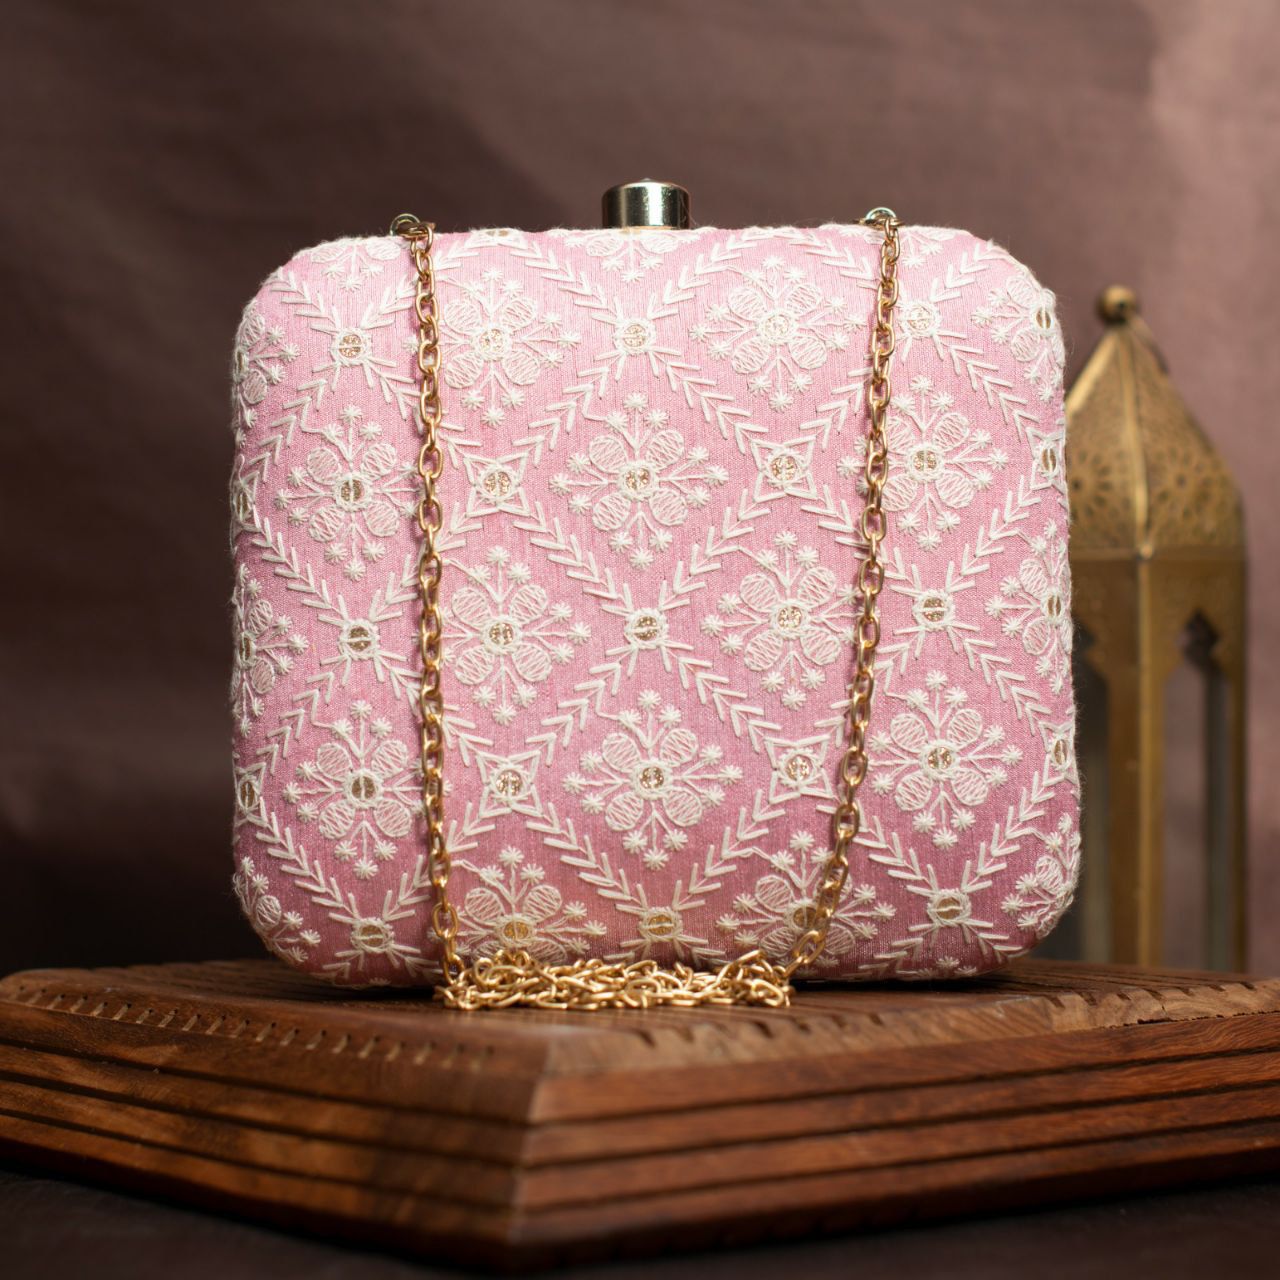 Ethnic Embroidery Clutch Bag